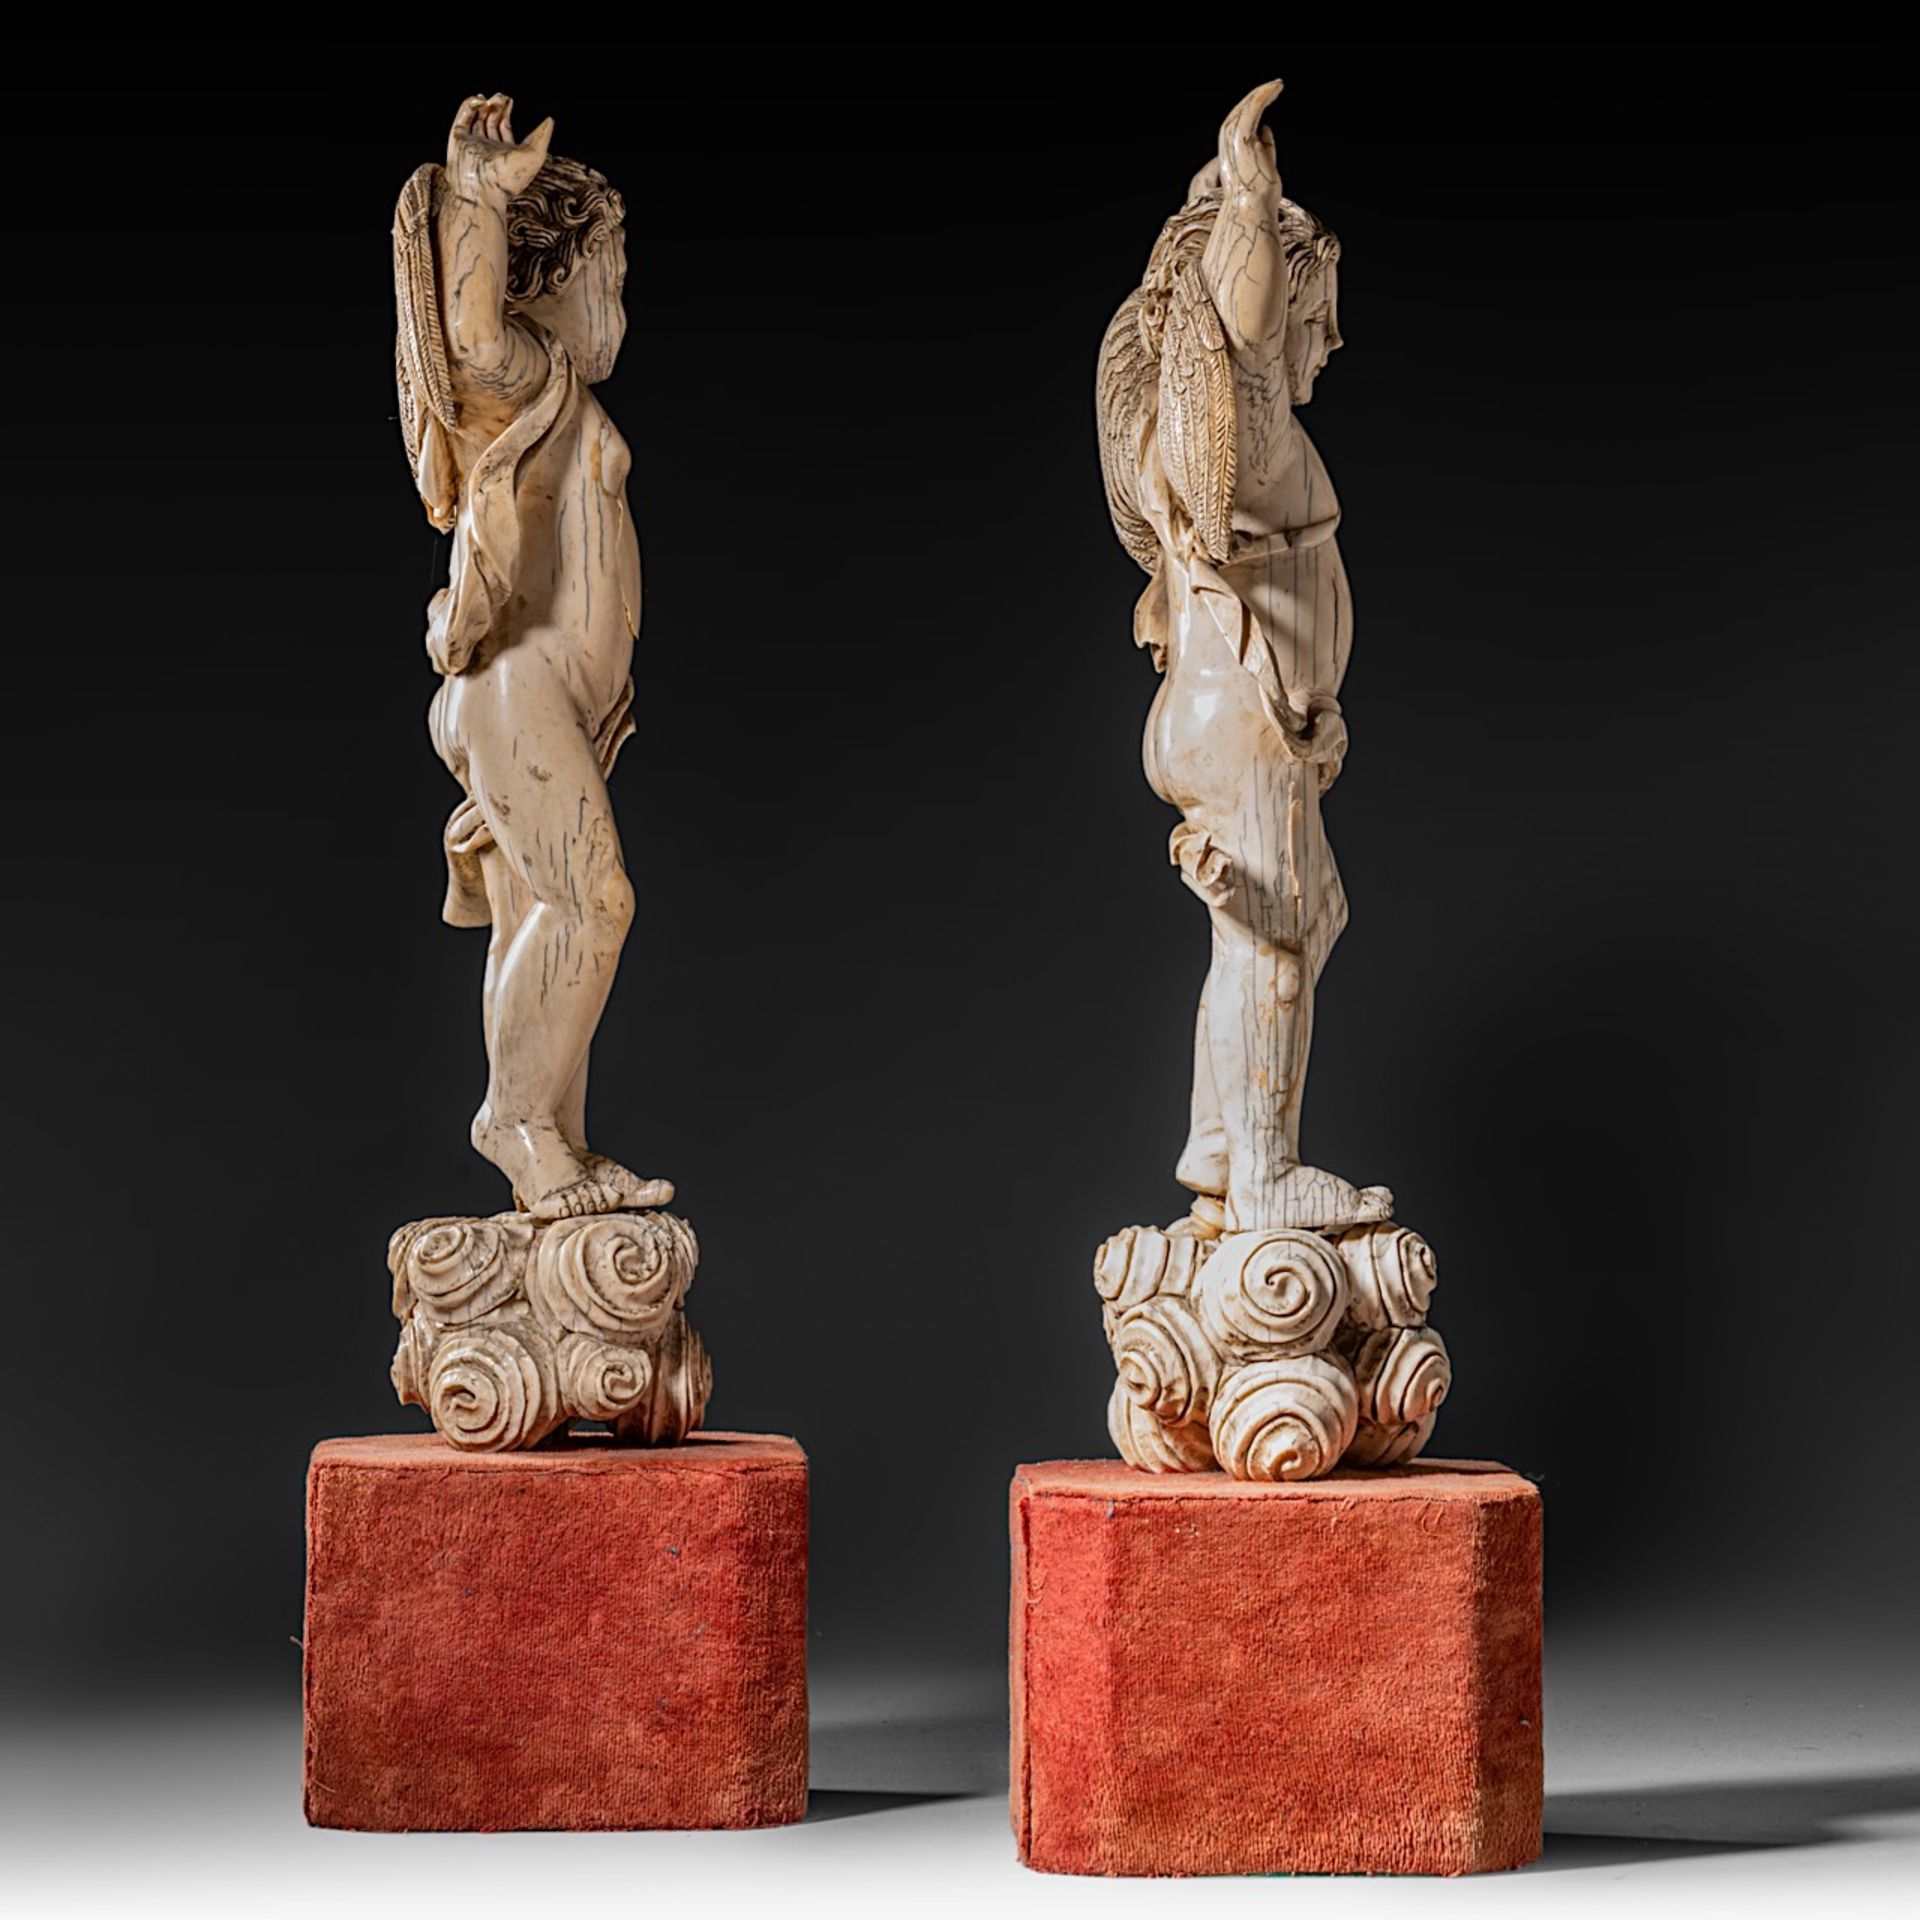 A pair of 17thC Indo-Portuguese ivory angels, H (figures) 38,5 cm - total H 49 cm / 2862 - 2968 g (+ - Image 6 of 7